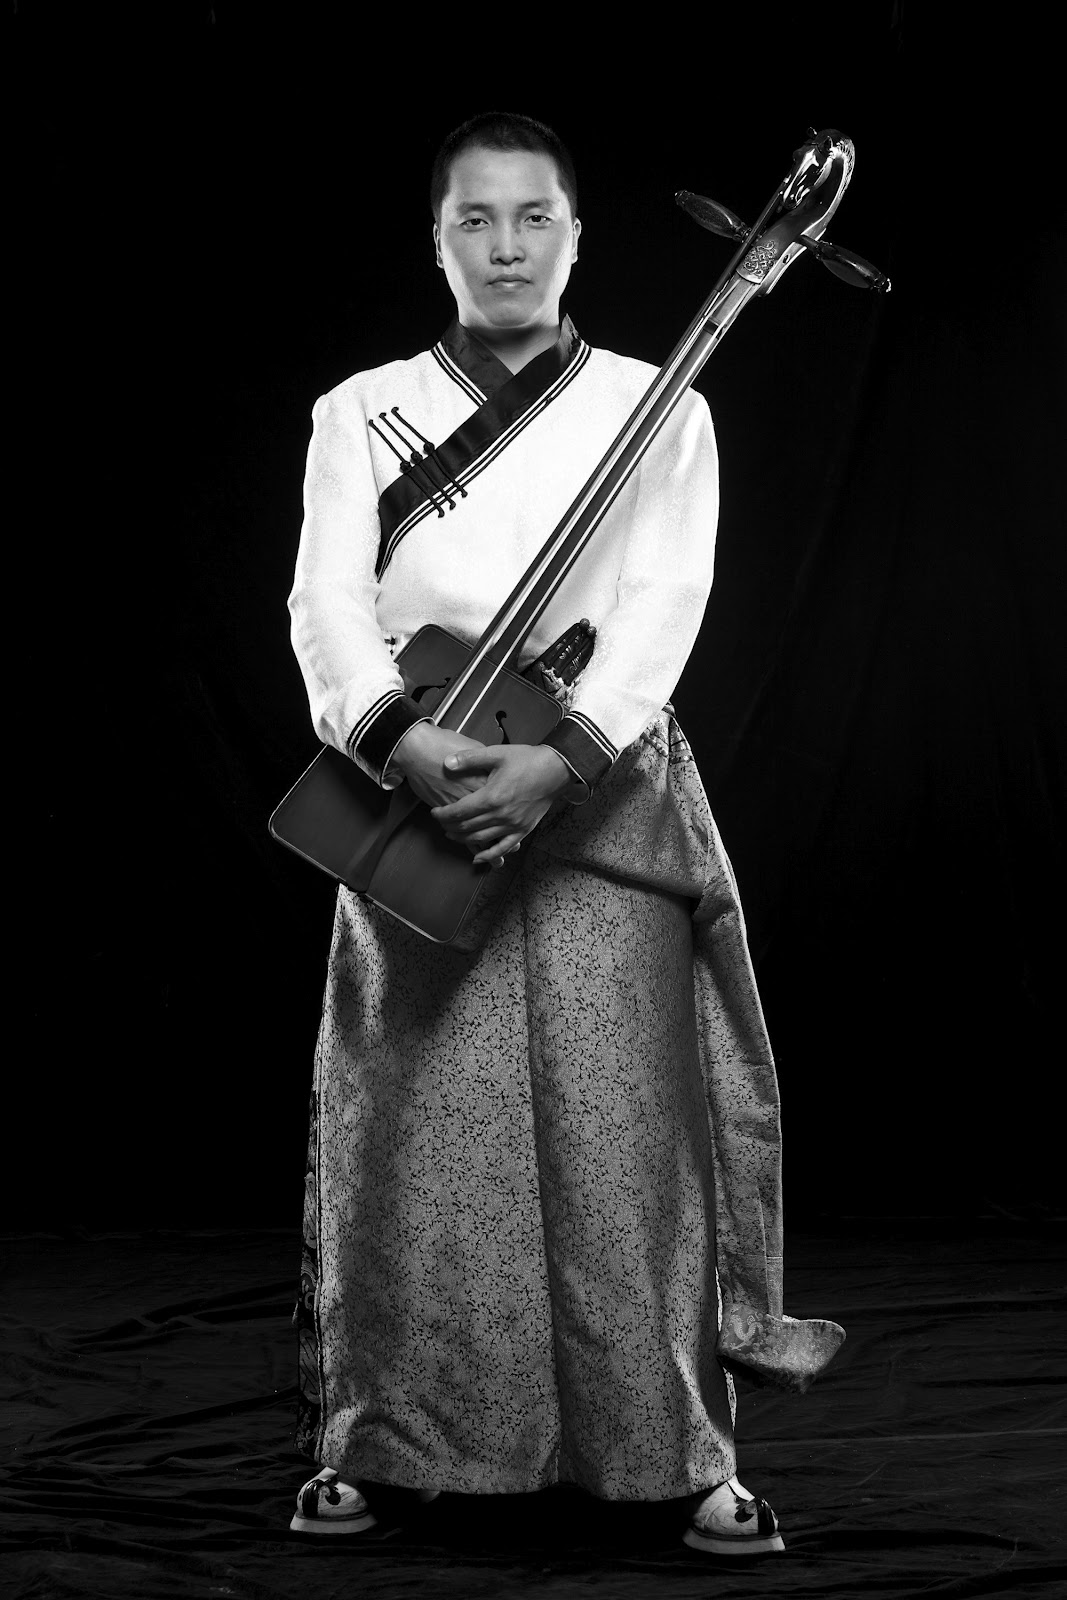 bukhu with horse fiddle black and white full lengh portrait